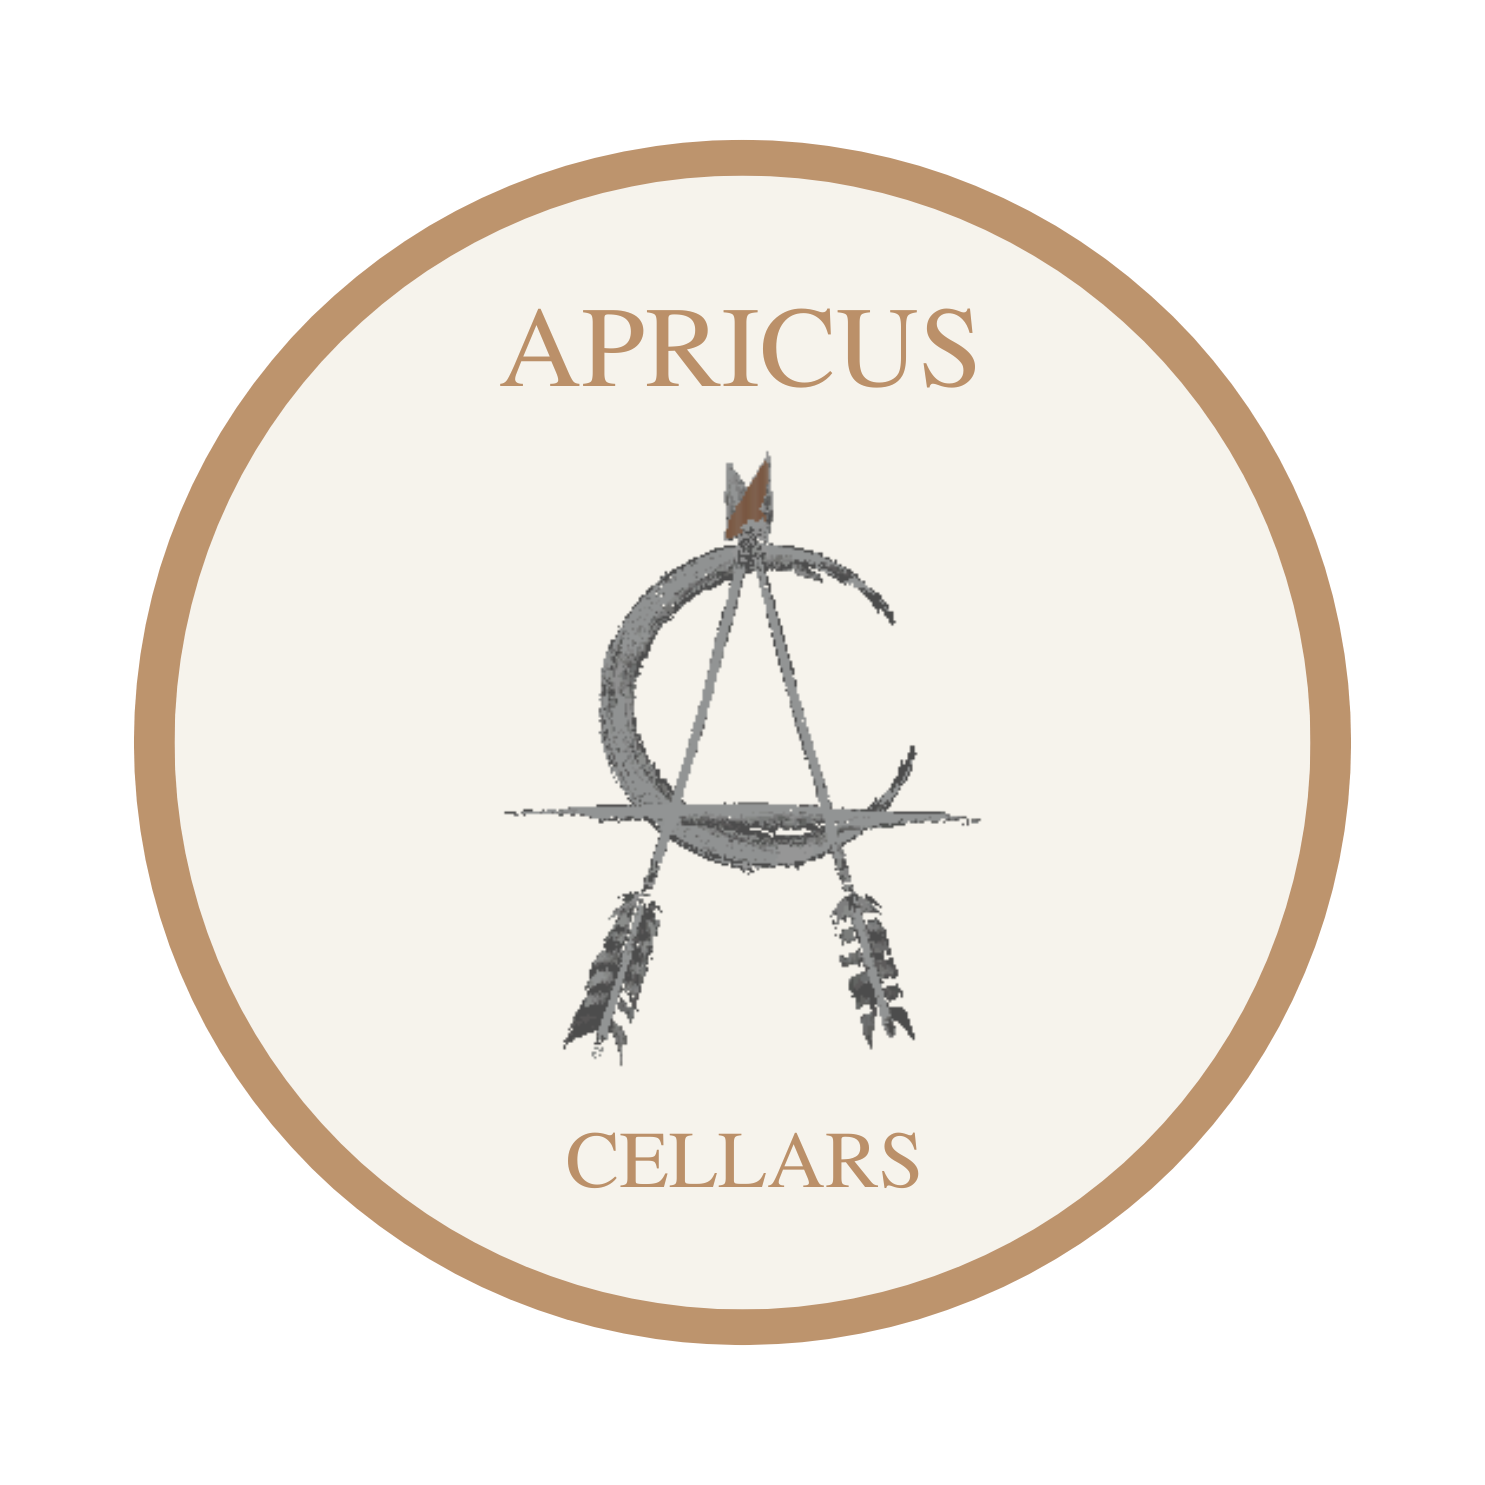 Welcome to Apricus Cellars